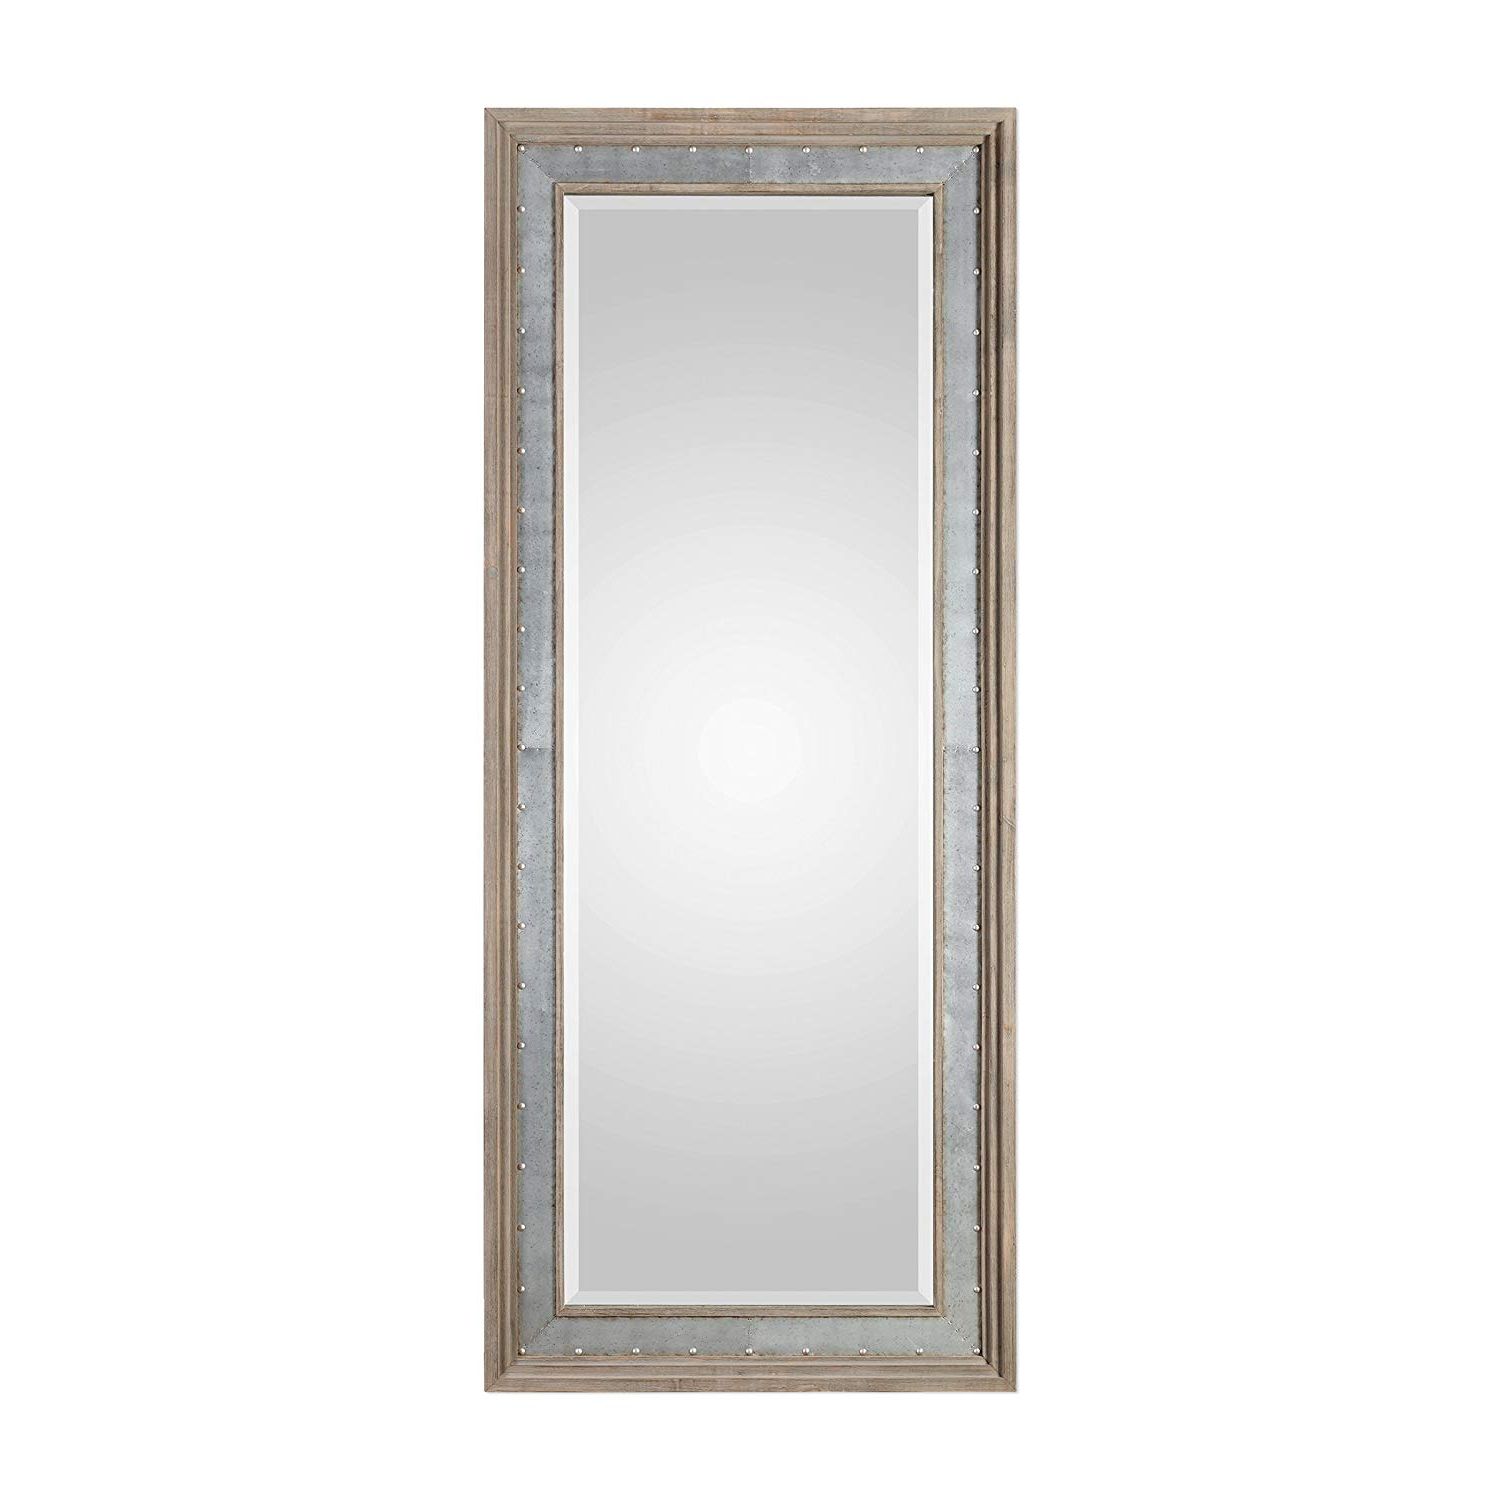 Current Industrial Full Length Mirrors Pertaining To Amazon: My Swanky Home Rustic Wood Metal Full Length Industrial (View 4 of 20)